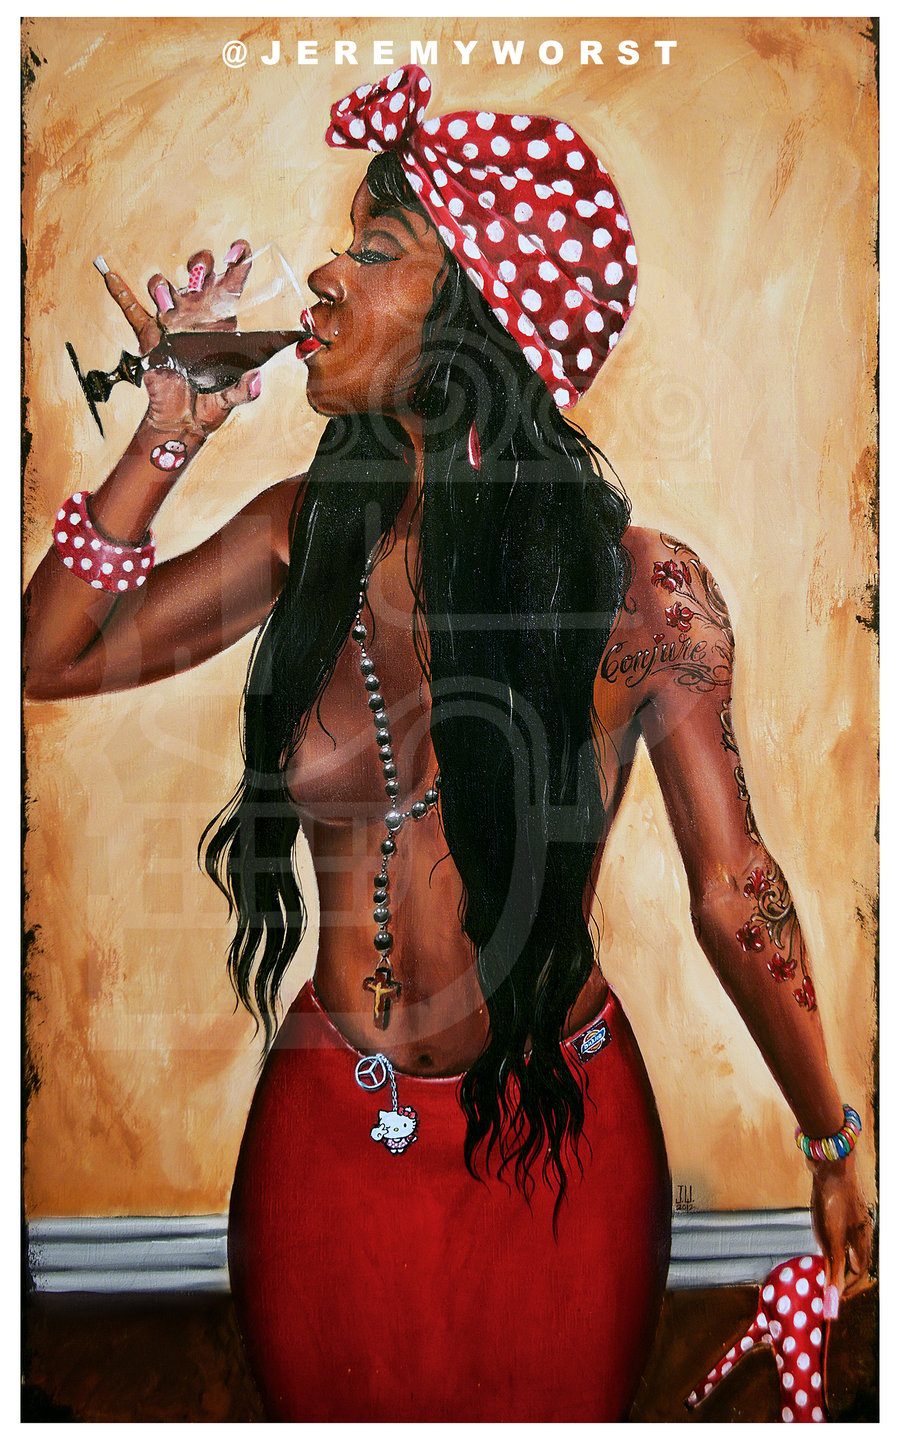 Image of JEREMY WORST Conjure sipping Sexy ink Tattoo Artwork wine African black Girl urban scarf urban 